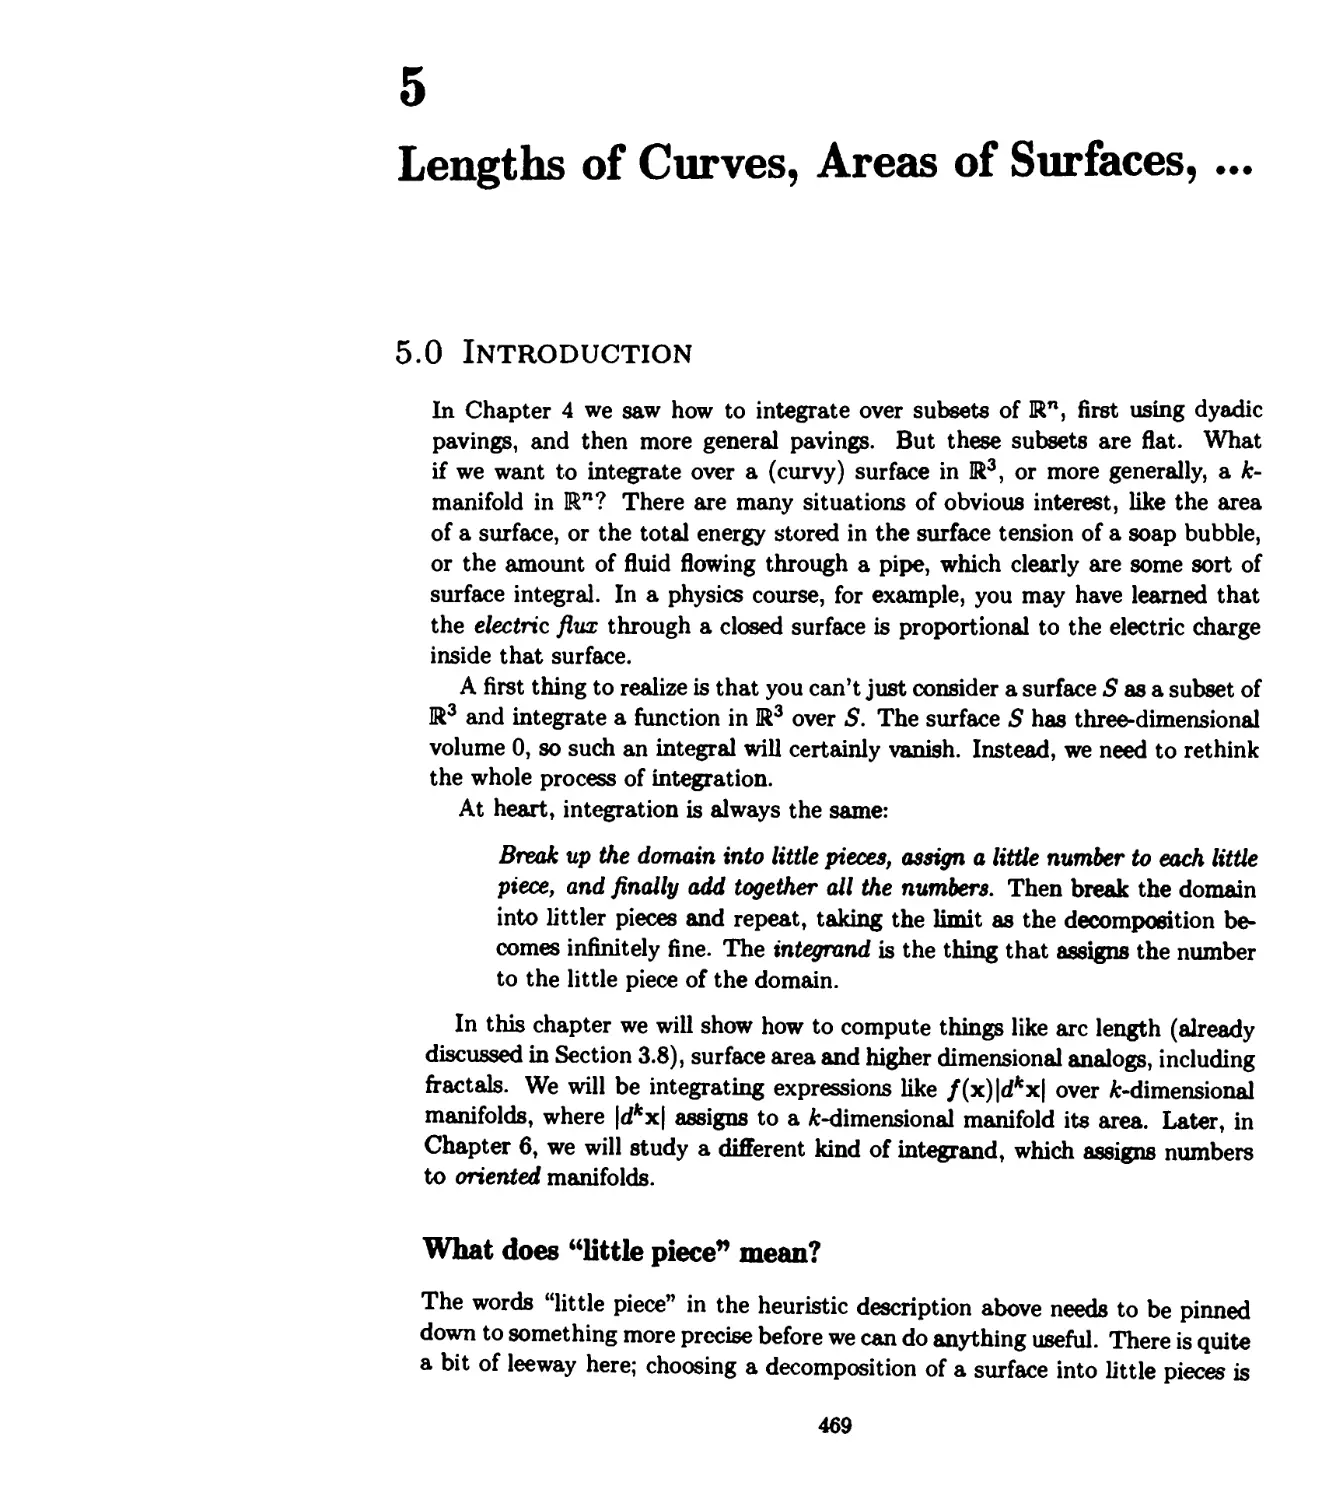 CHAPTER 5 Lengths of Curves, Areas of Surfaces